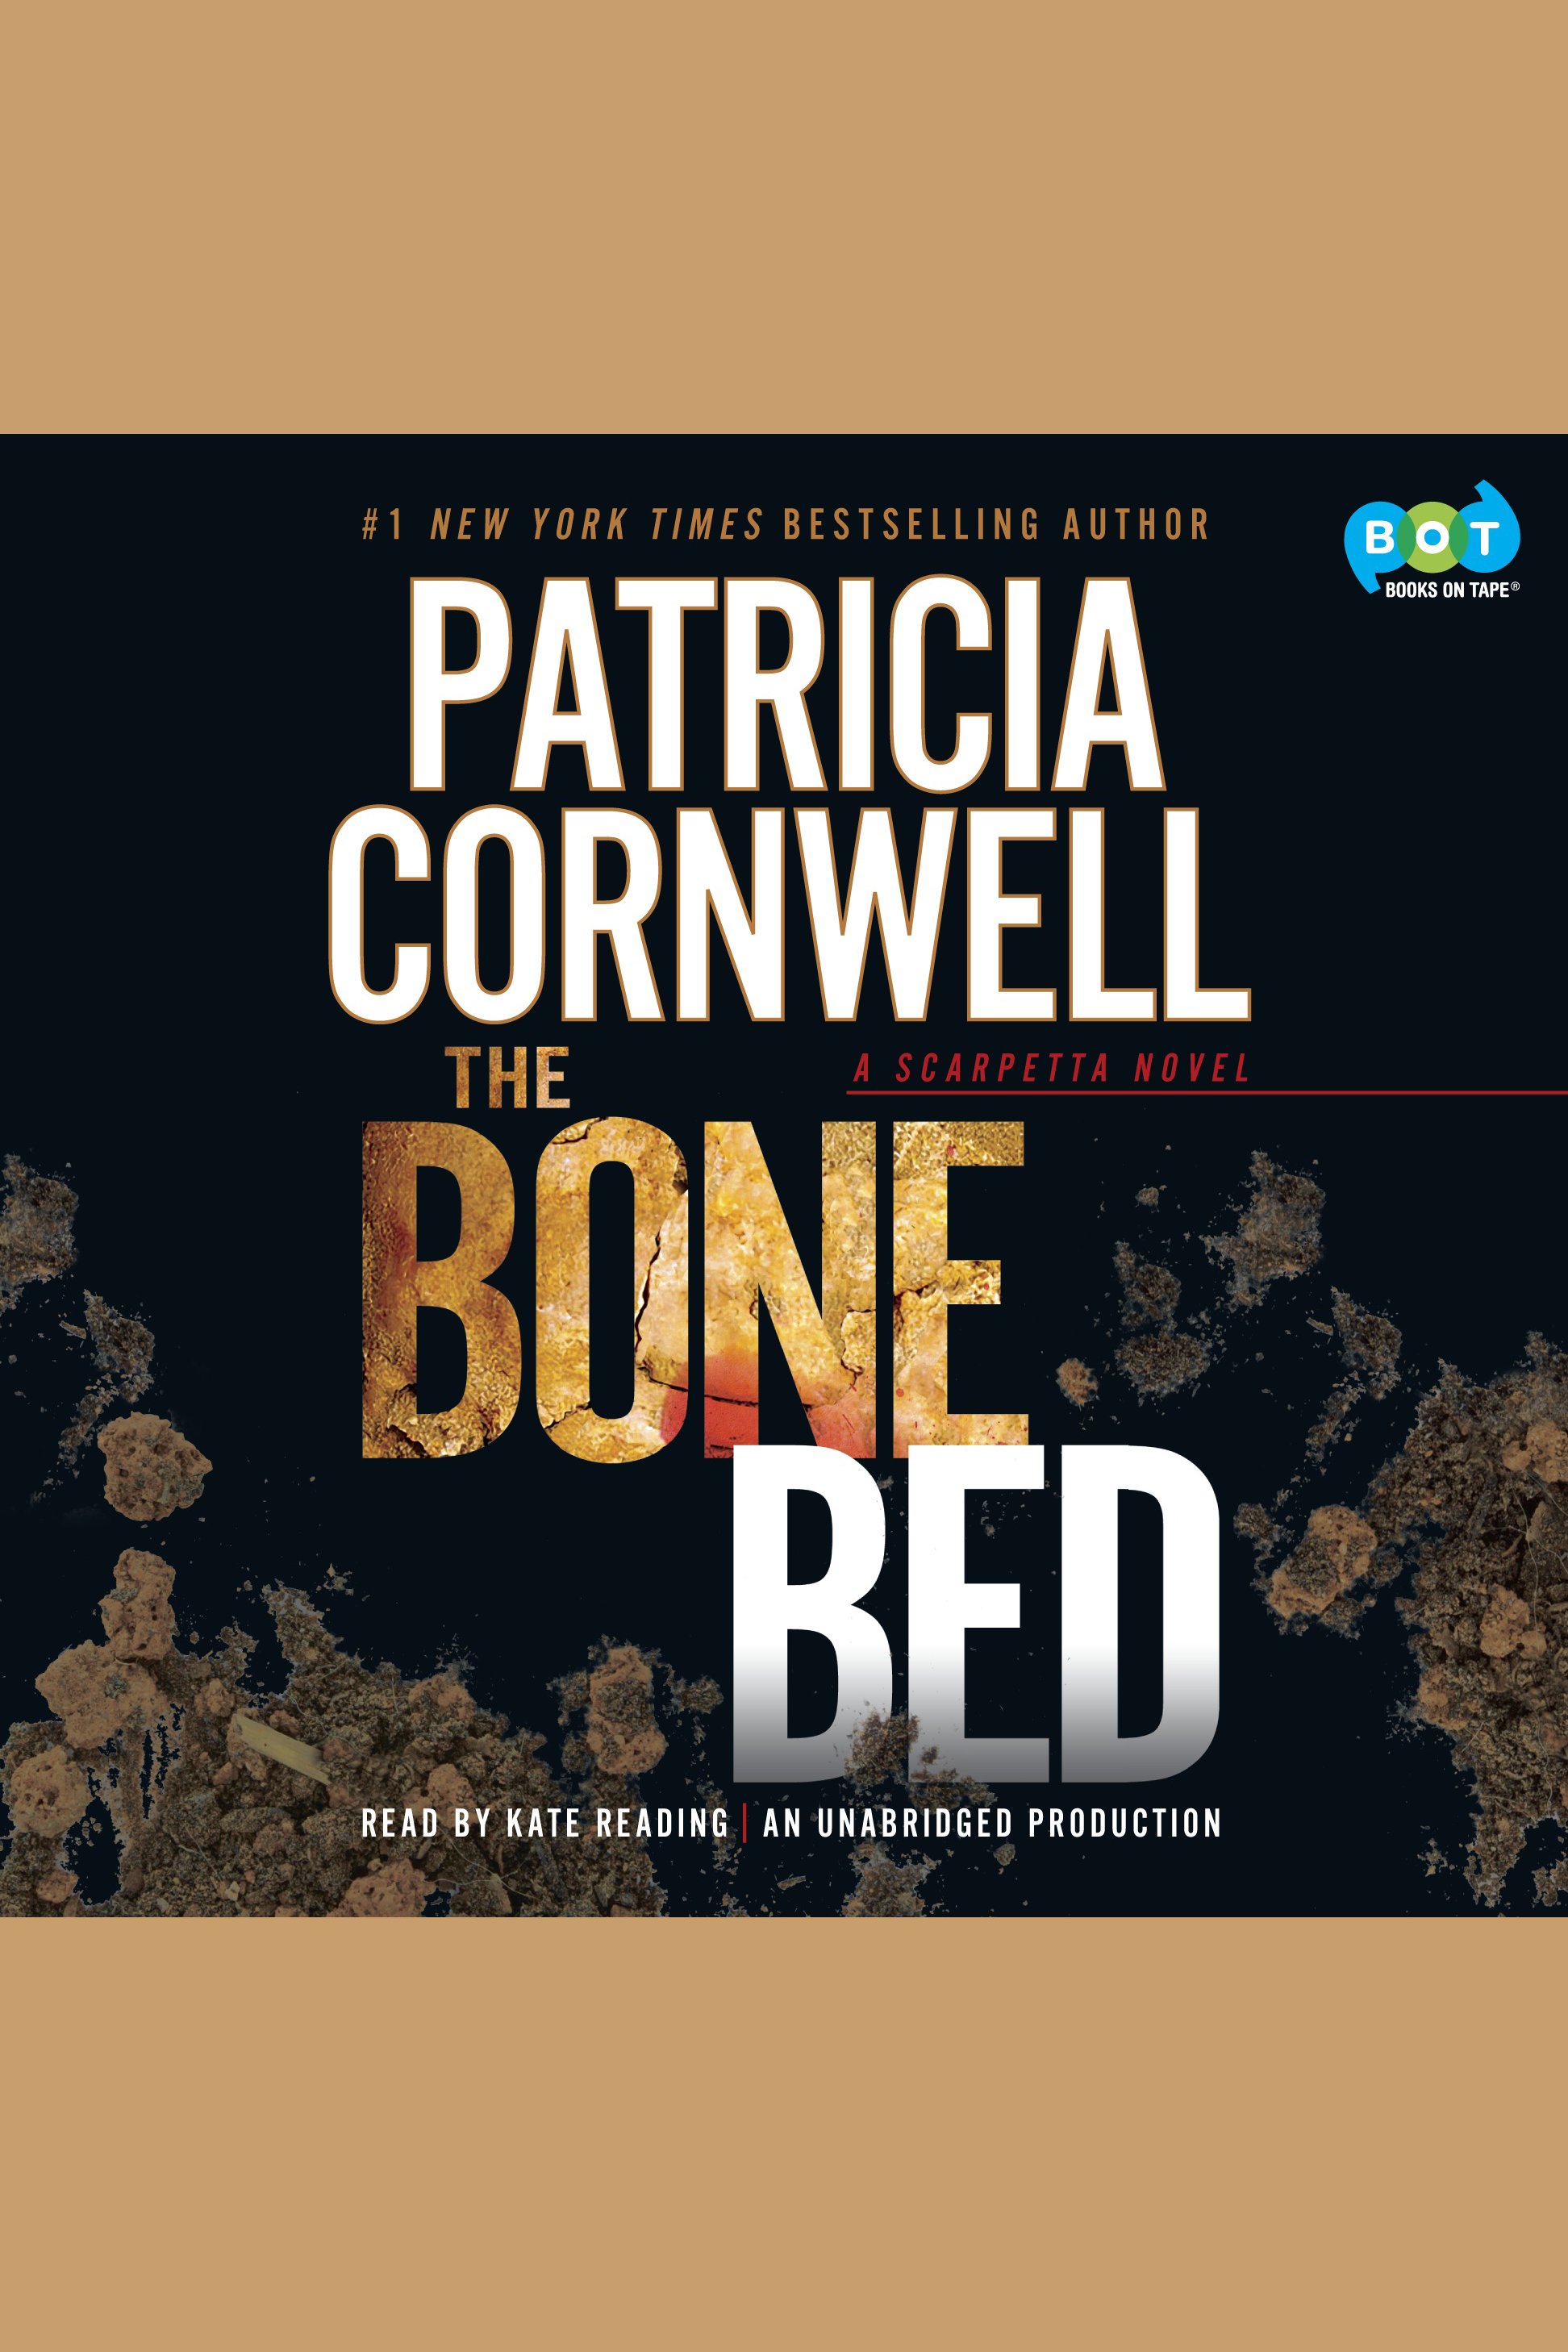 The bone bed cover image